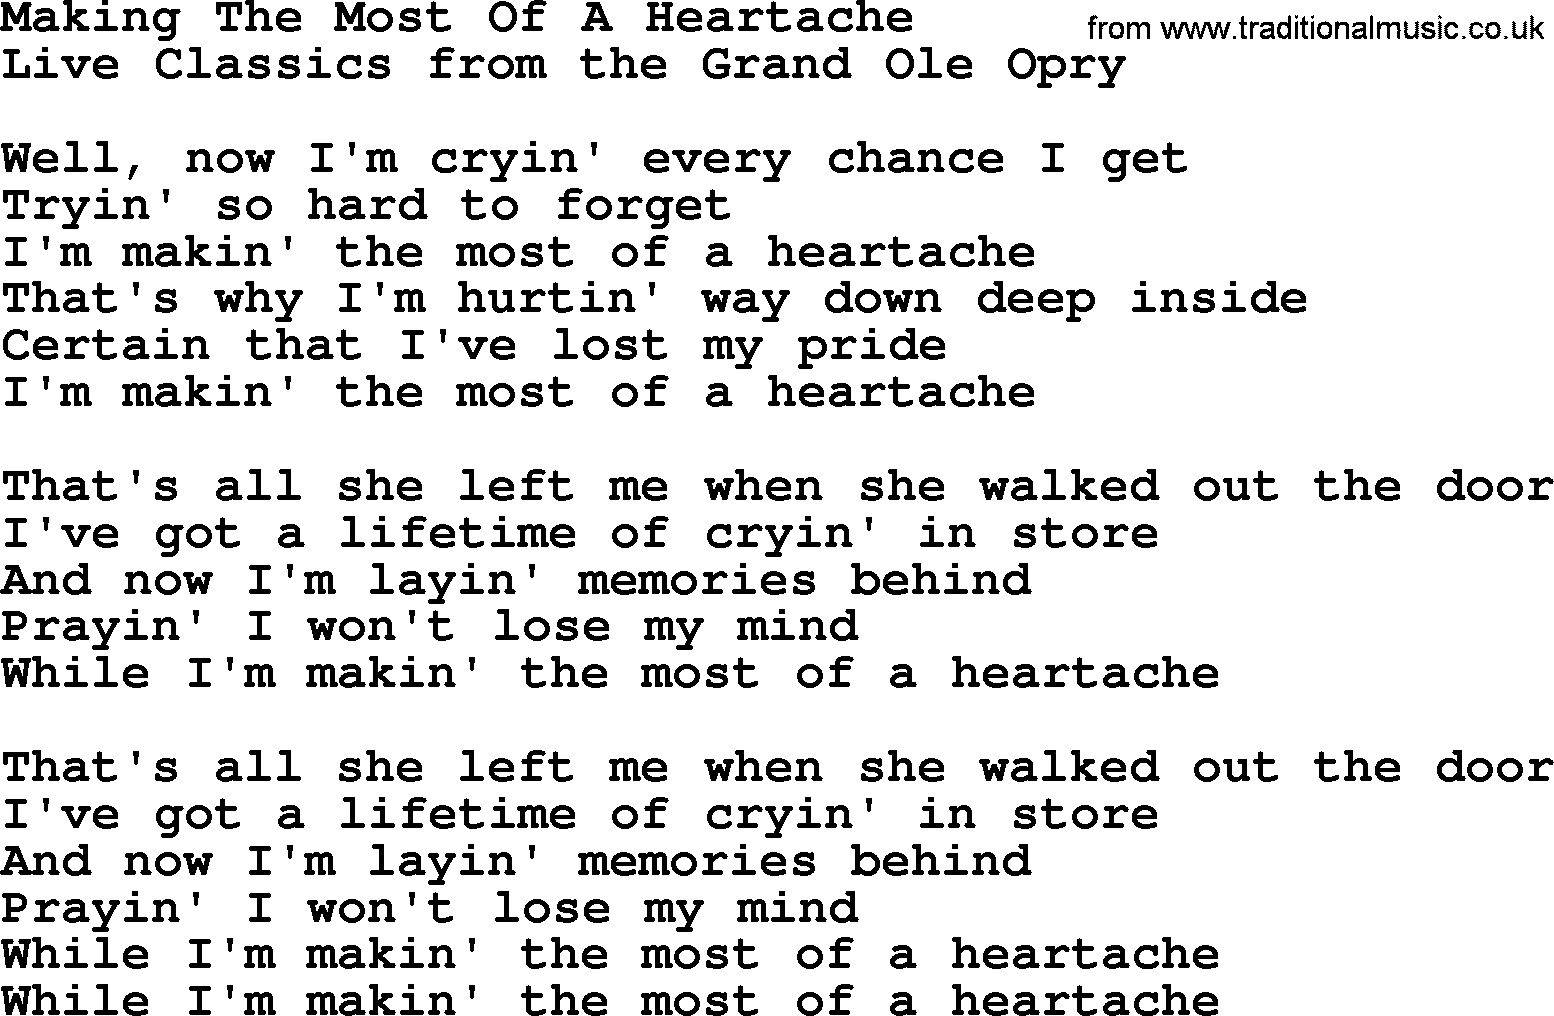 Marty Robbins song: Making The Most Of A Heartache, lyrics